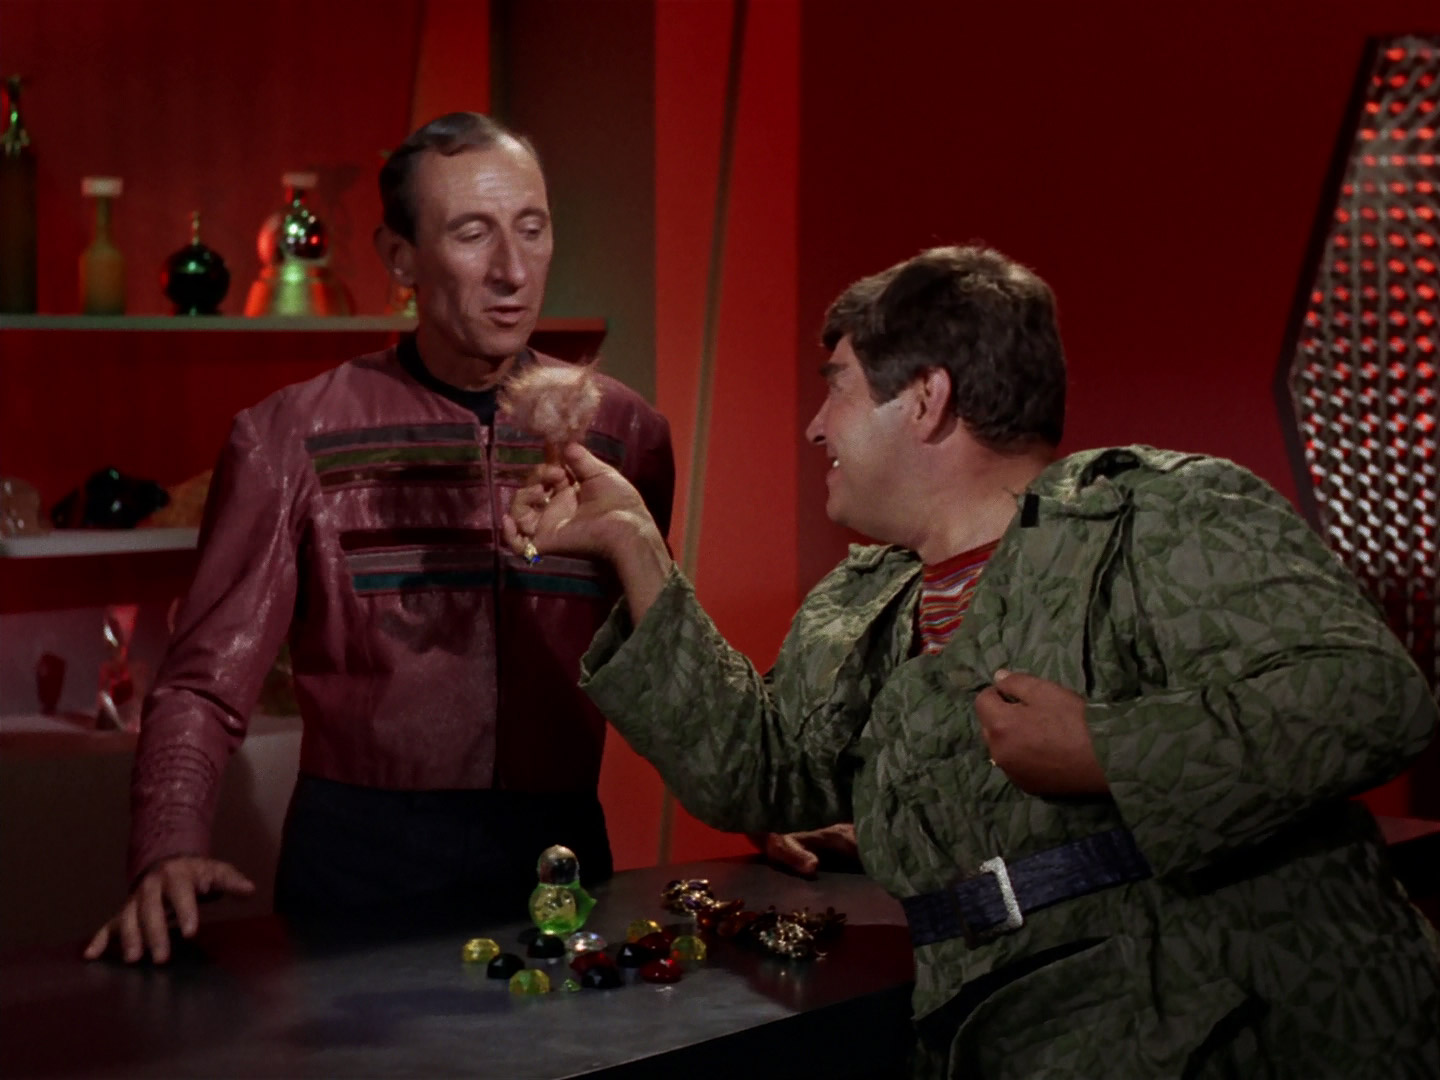 https://tos.trekcore.com/gallery/albums/screencaps/season2/213-trouble-with-tribbles/trouble-with-tribbles-134.jpg